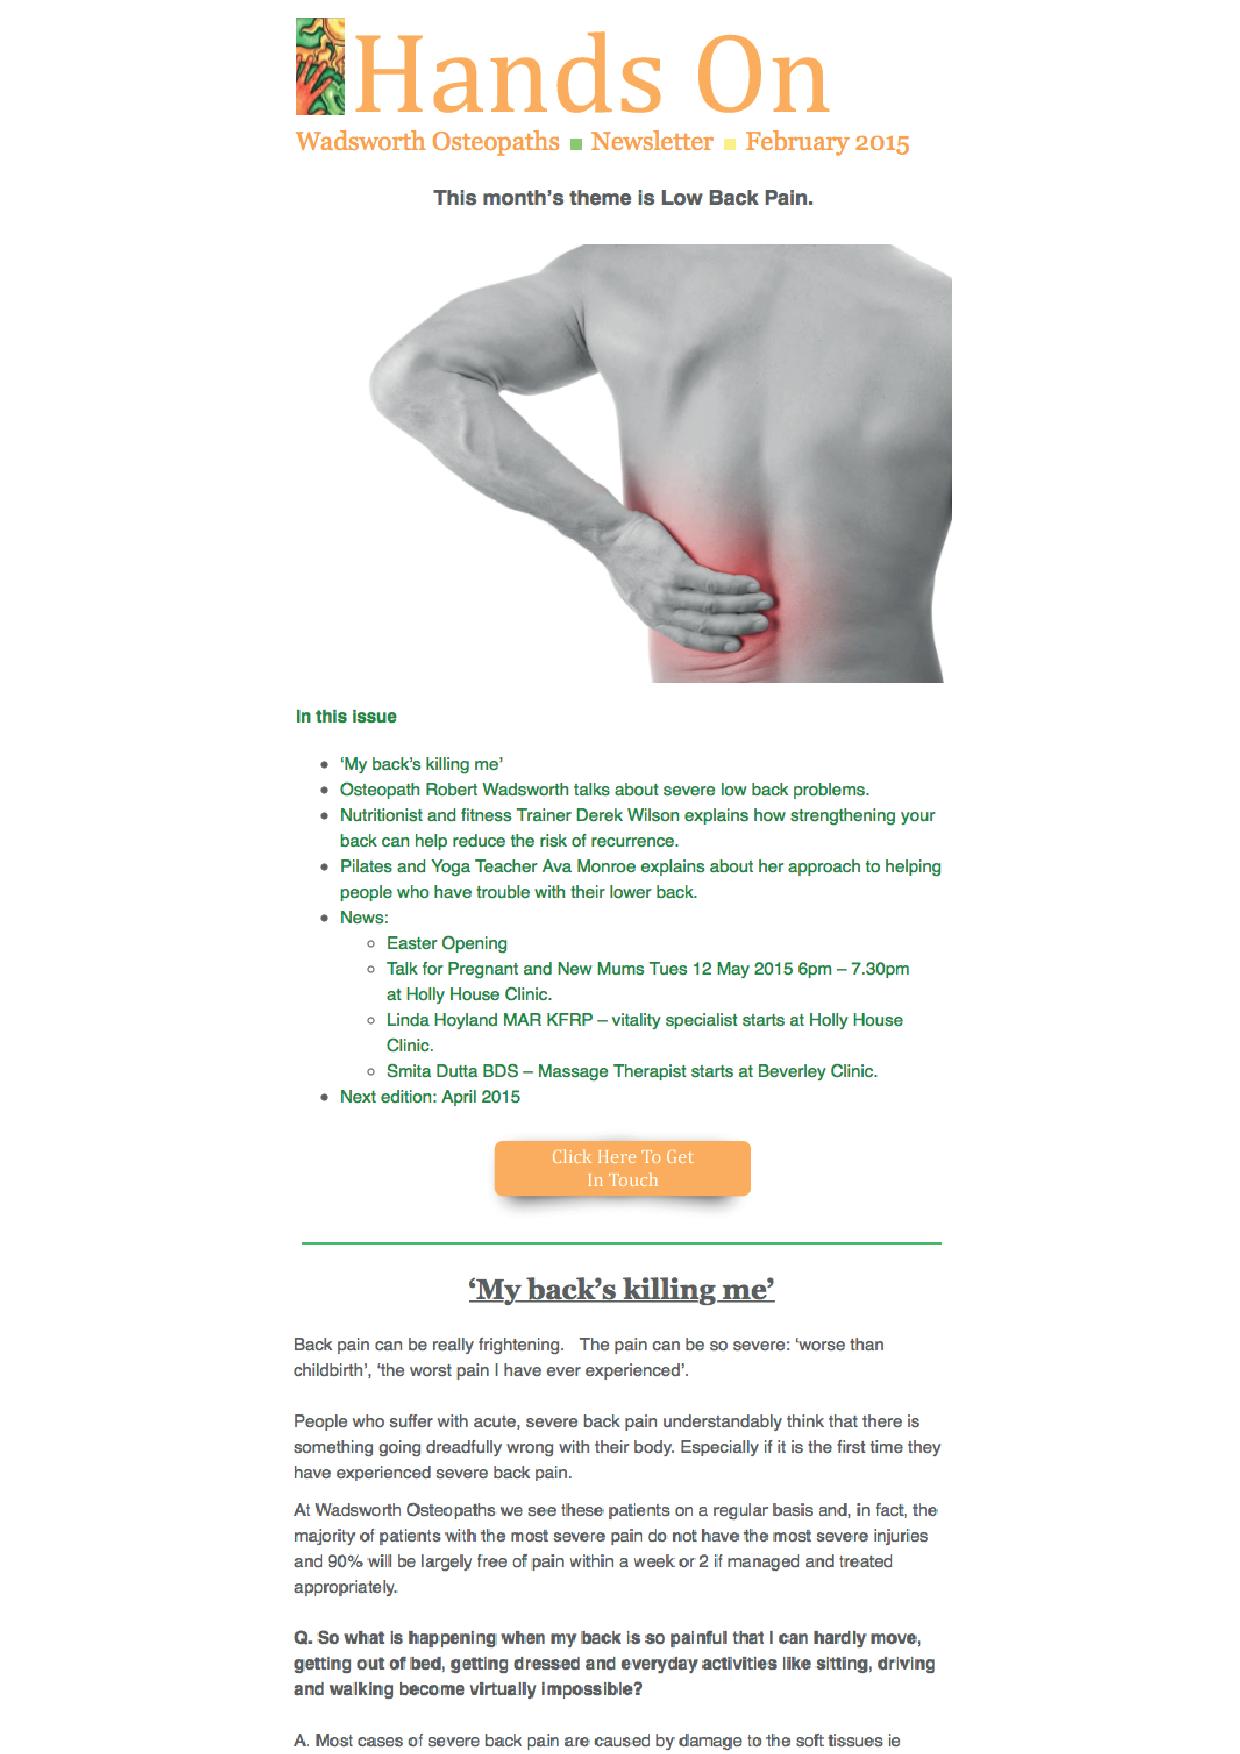 Wadsworth Osteopaths - low back pain newsletter